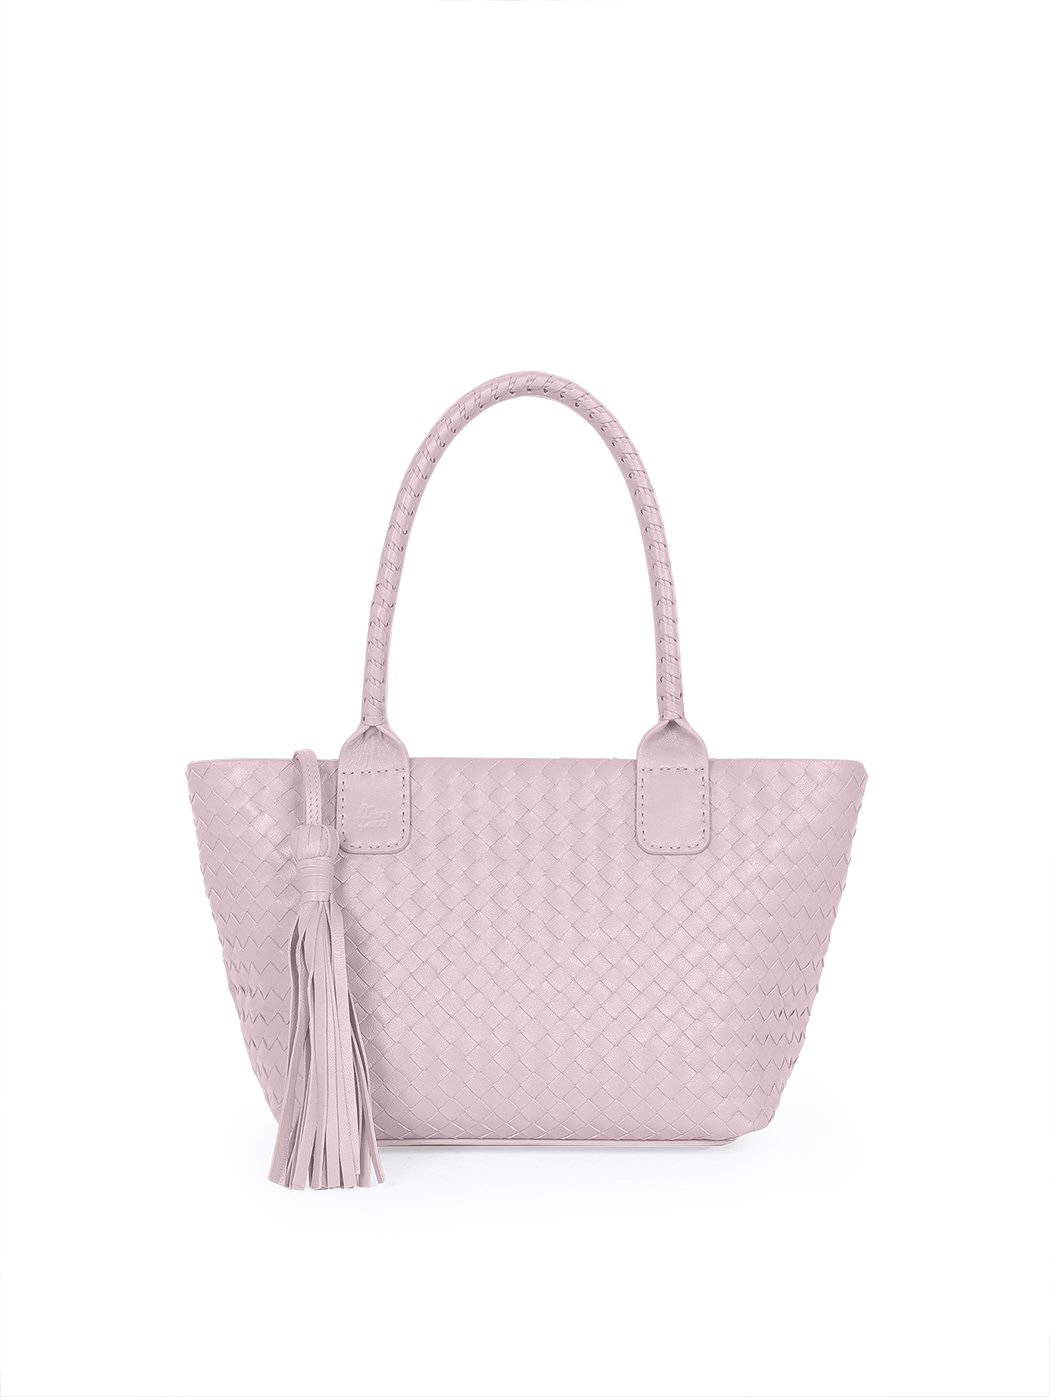 Medium Top Handle Woven Leather Shoulder Tote Pink